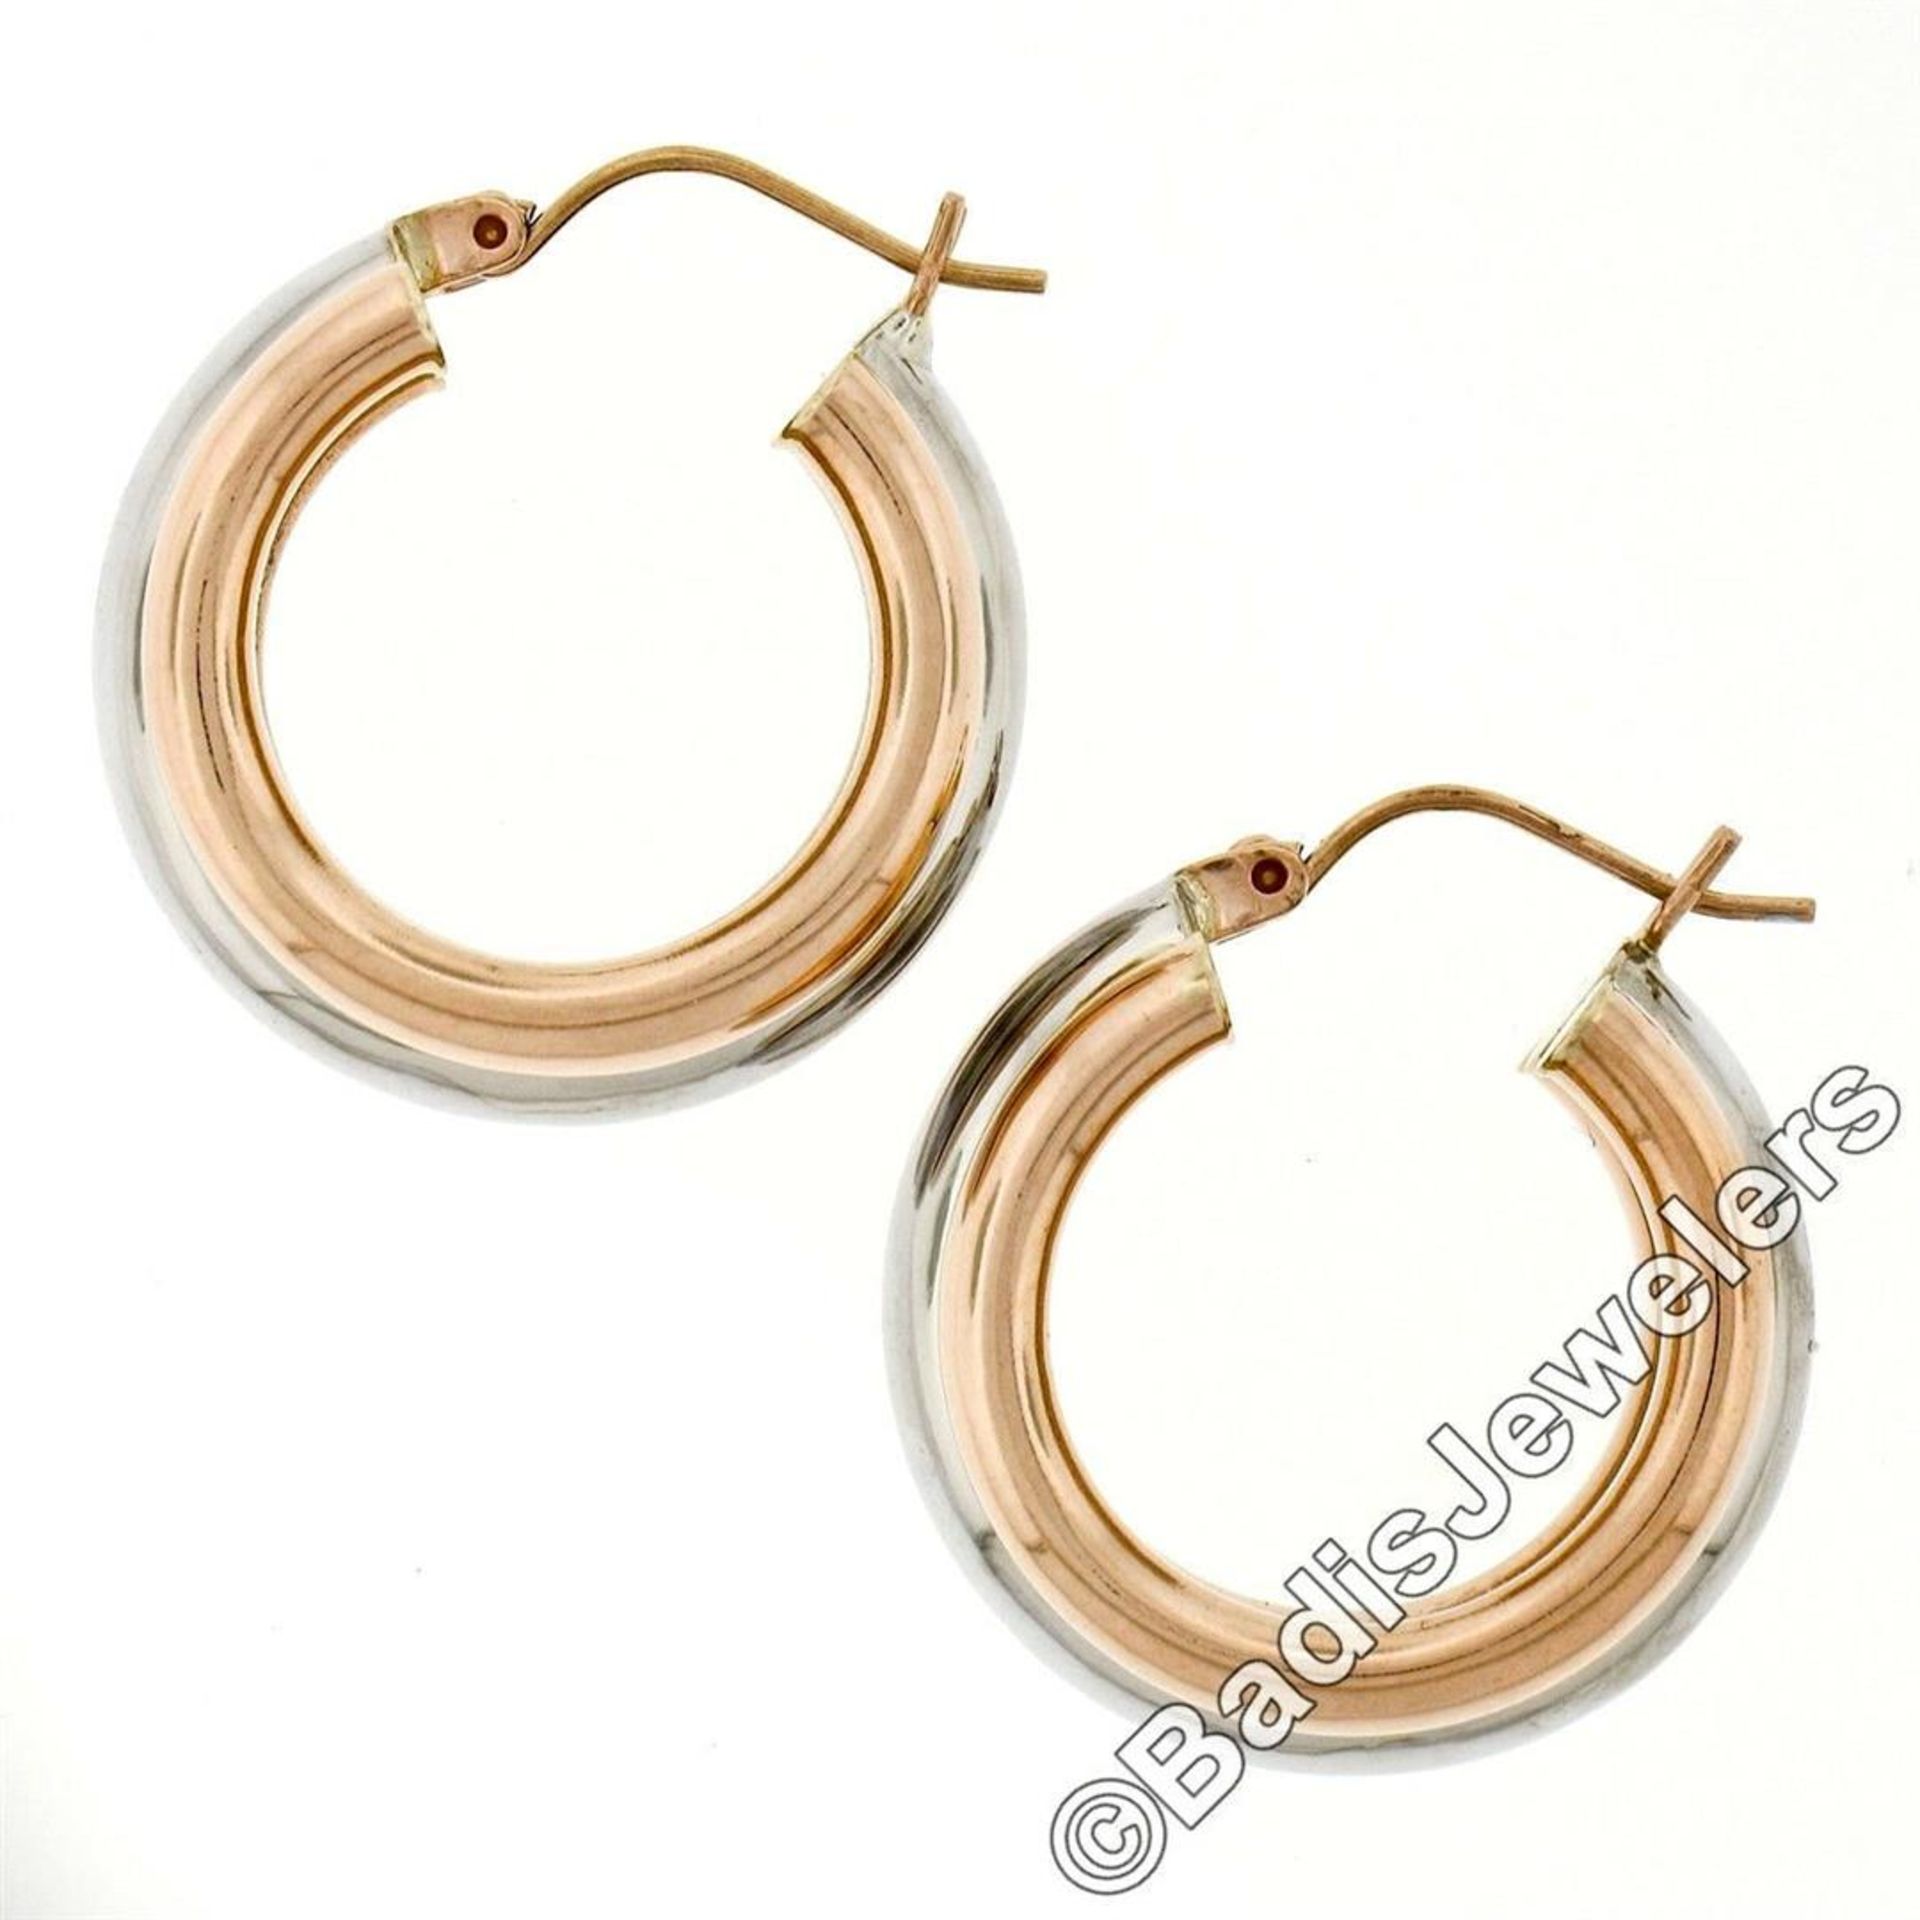 New 14kt Rose & White Gold Triple Puffed Tube Round Hoop Earrings - Image 4 of 5